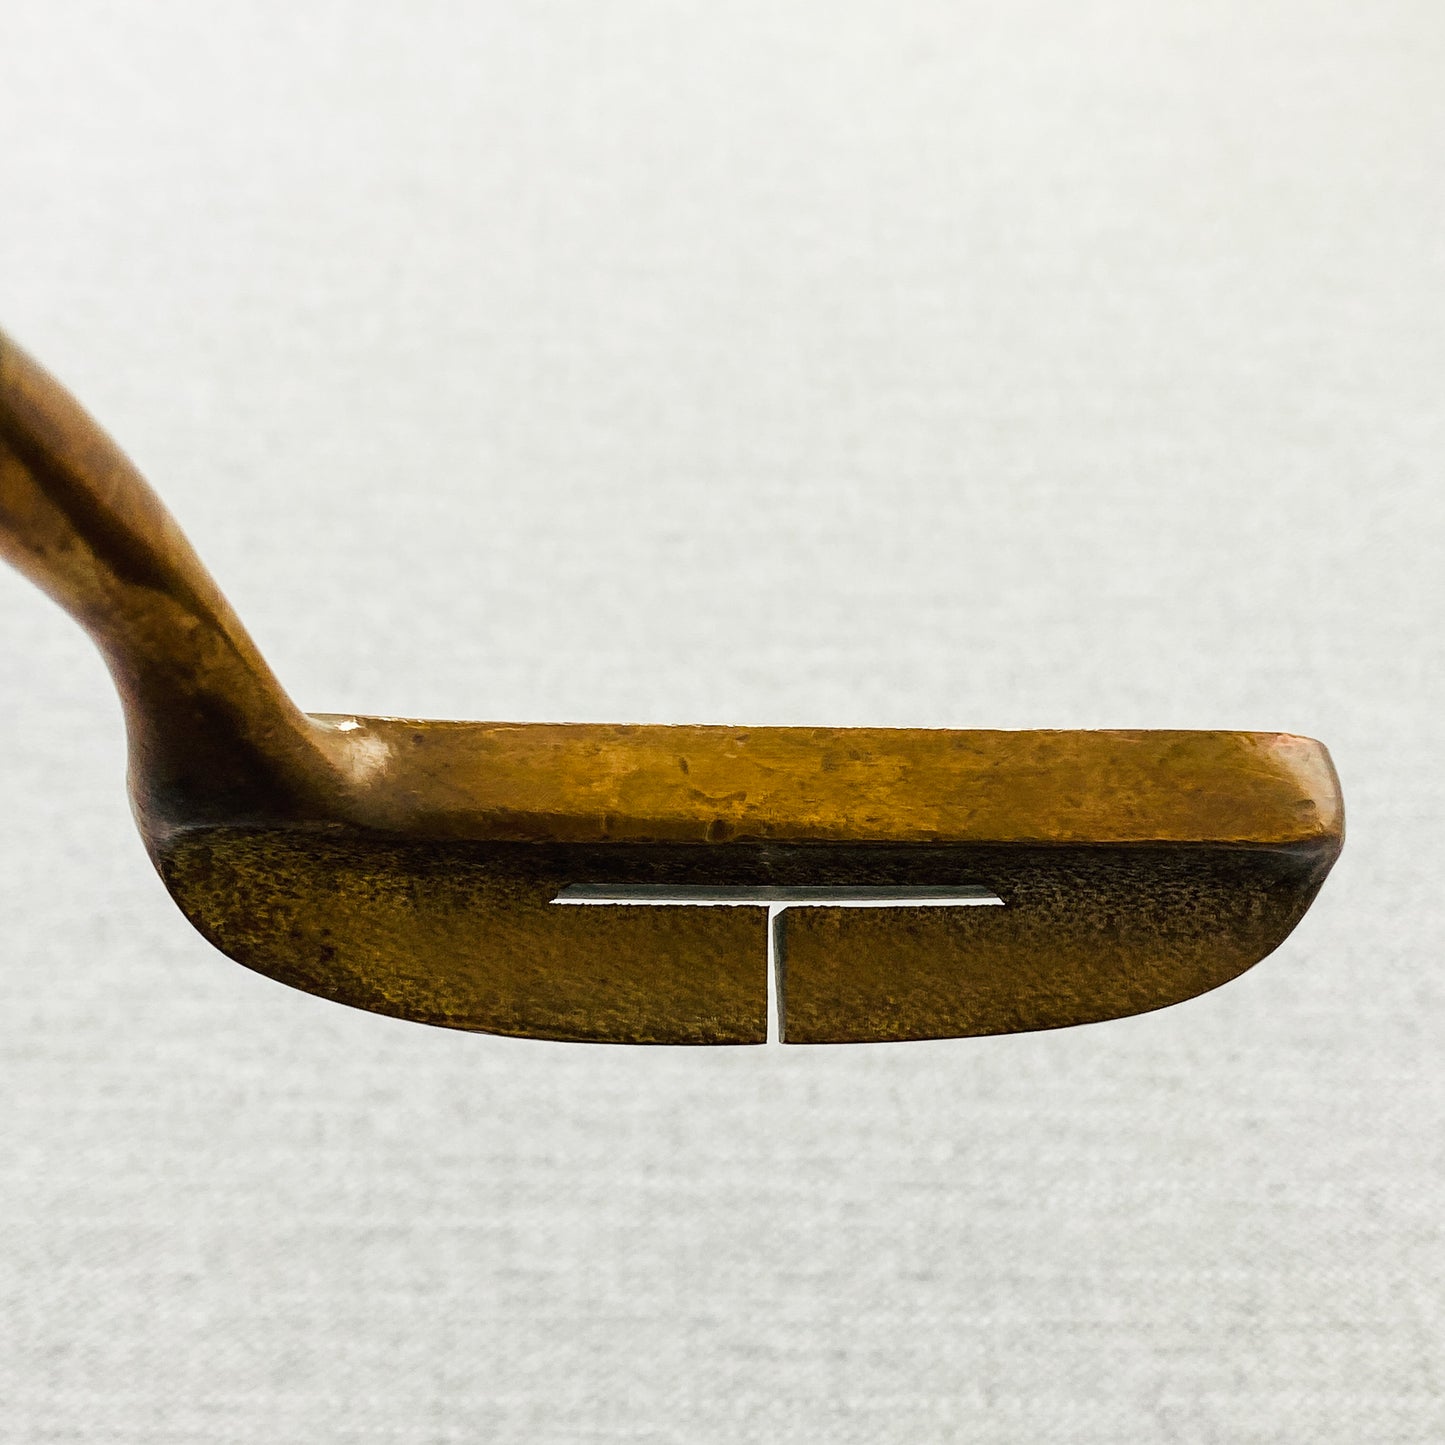 Acushnet Bulls Eye 34A Heel Shafted Putter. 34.5 inch - Good Condition # 13197